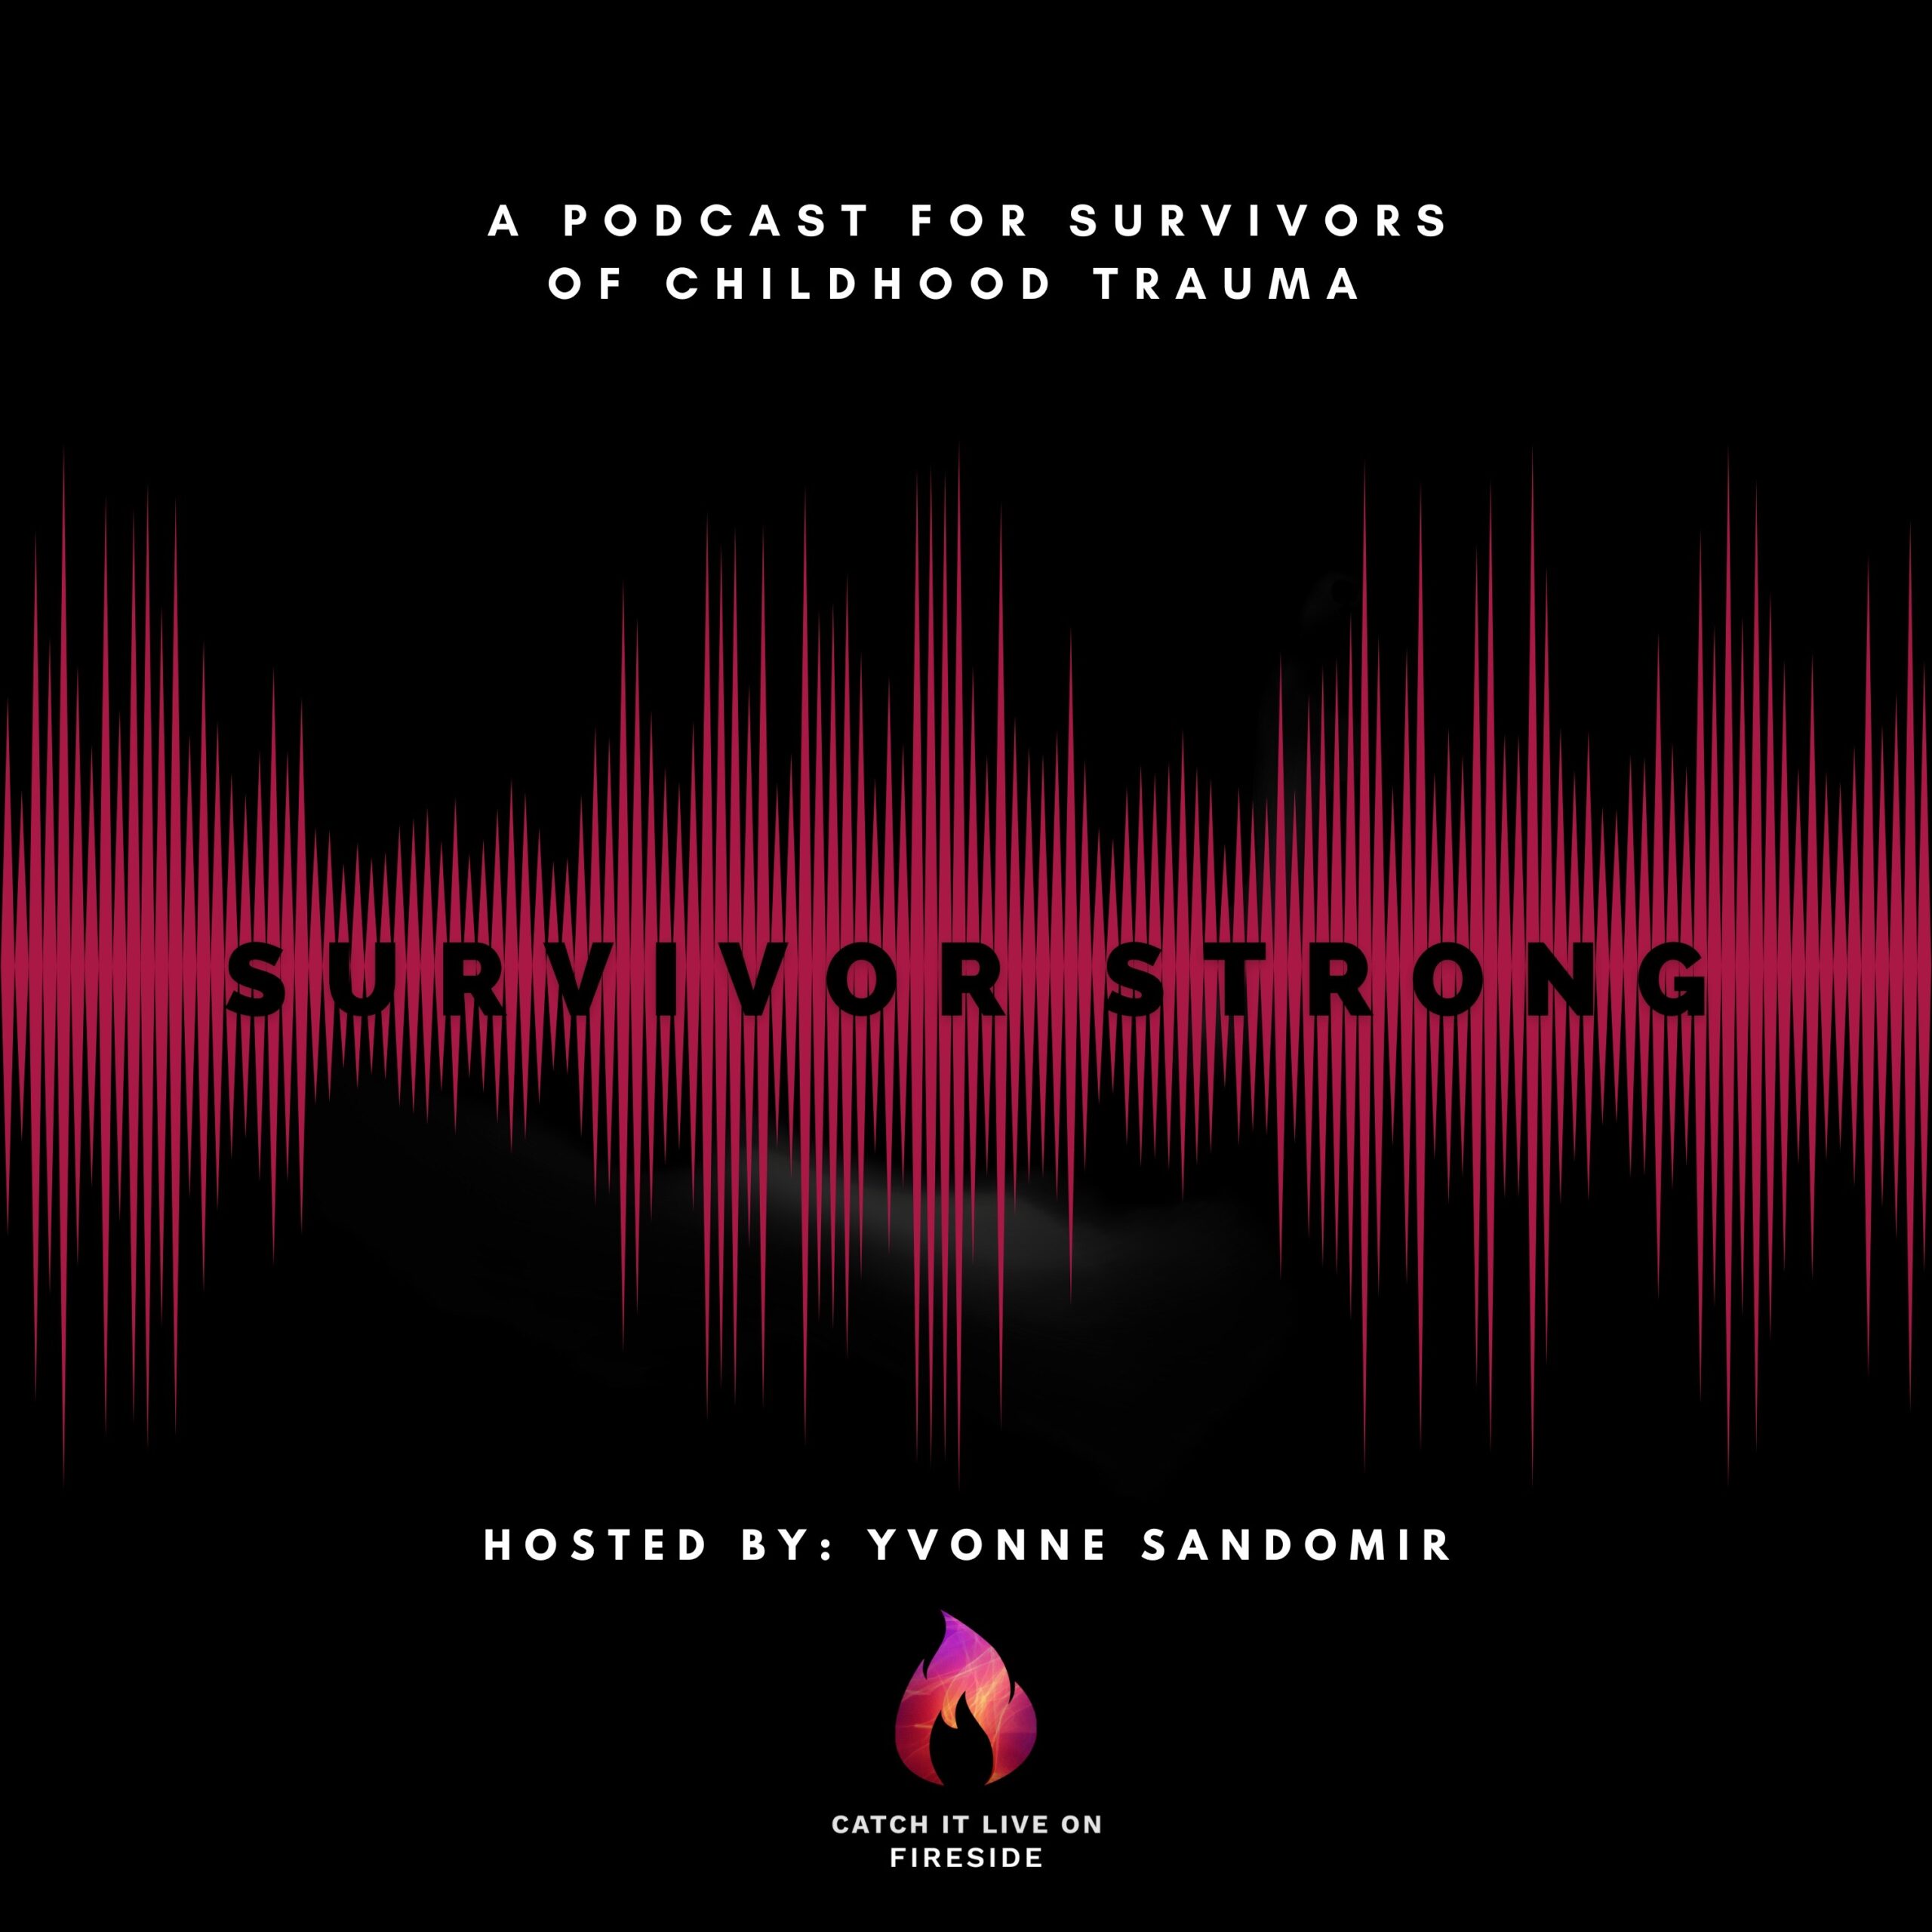 The Survivor Strong Podcast